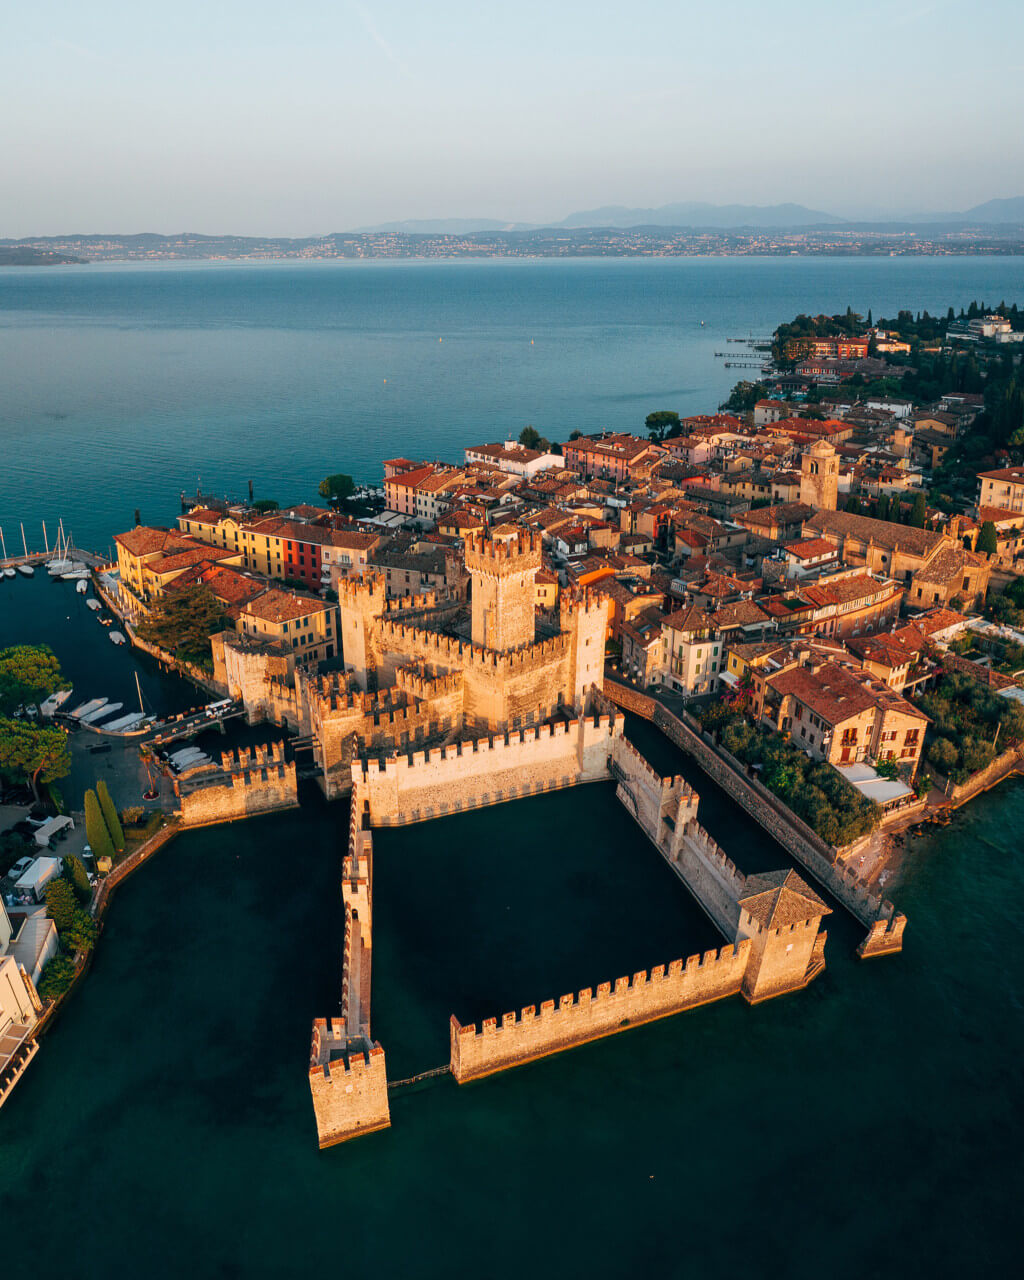 HOW TO VISIT SIRMIONE